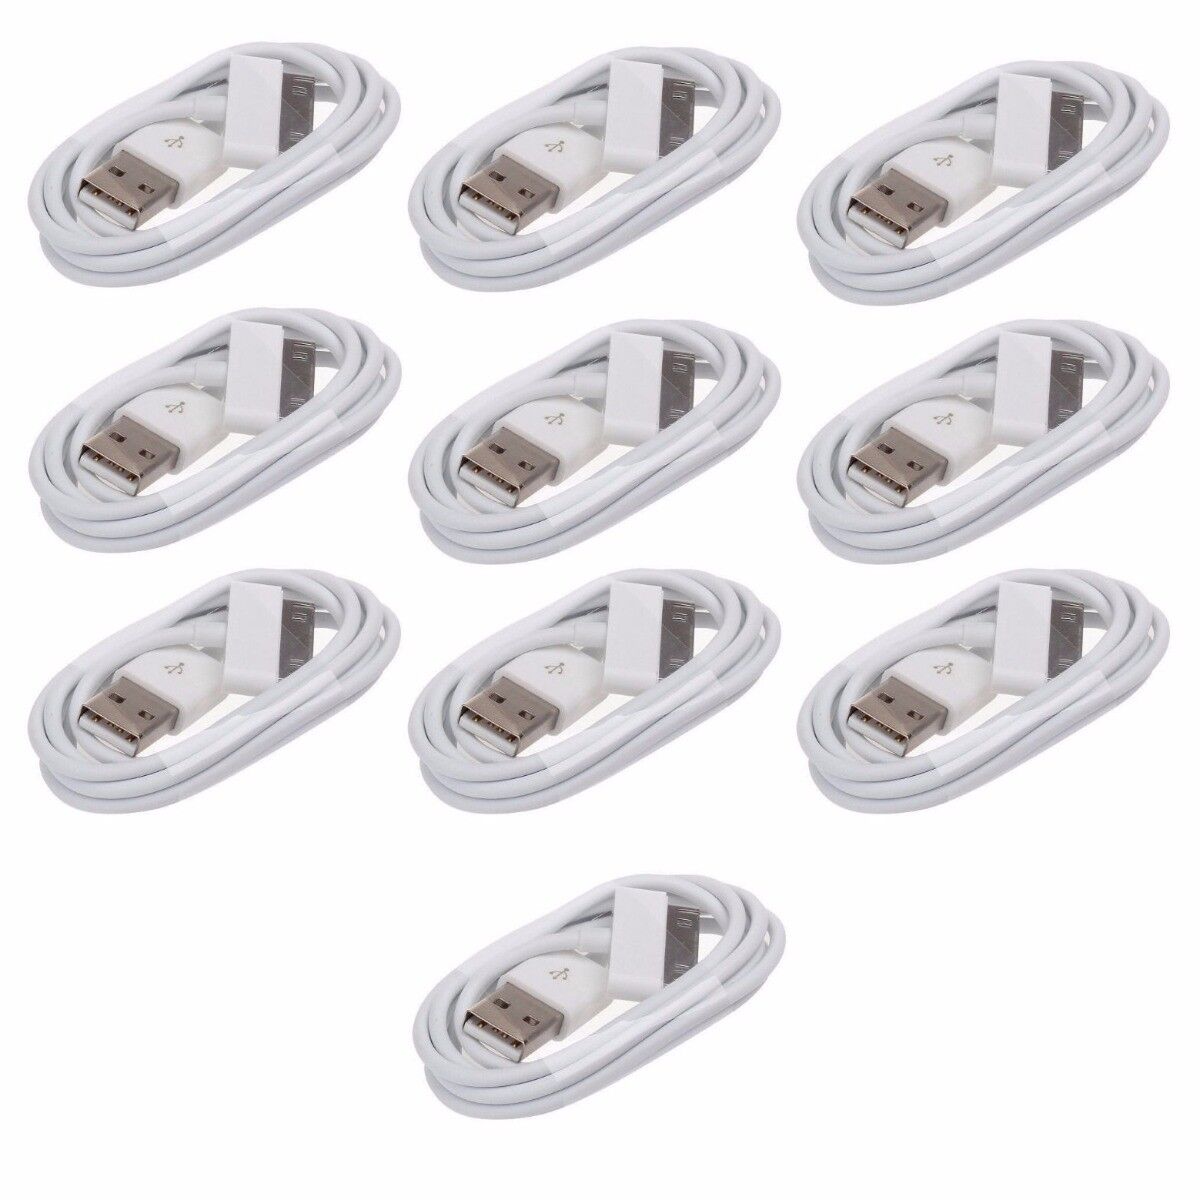 10 x USB Data Sync Charger Cable Cord for Apple iPhone 4 4S iPad 2 3 Nano Unbranded/Generic Does not apply